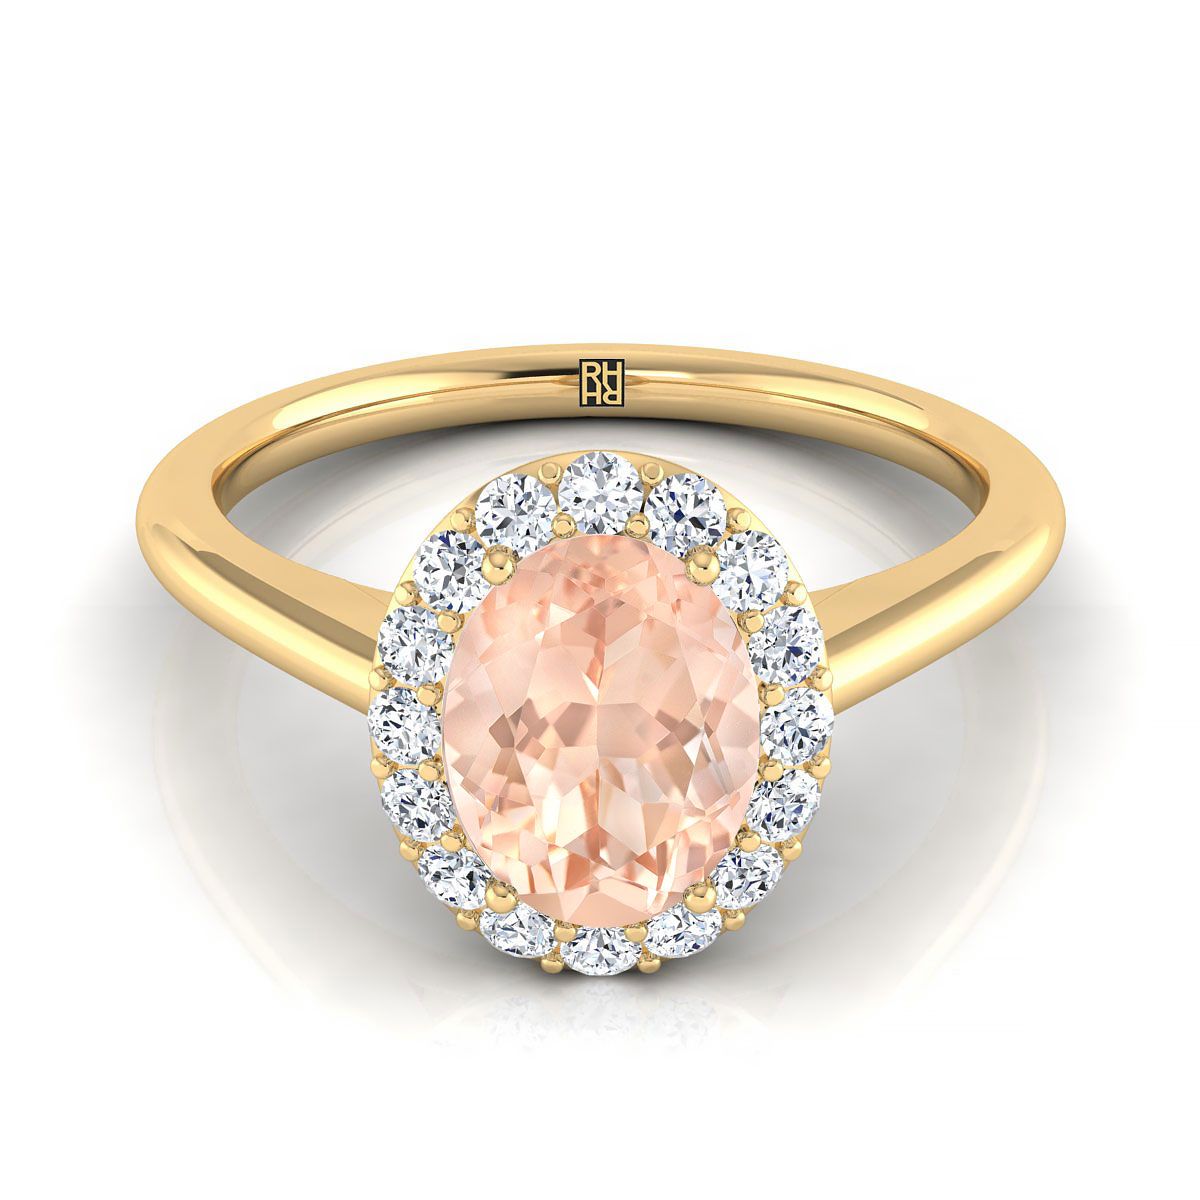 18K Yellow Gold Oval Morganite Shared Prong Diamond Halo Engagement Ring -1/5ctw